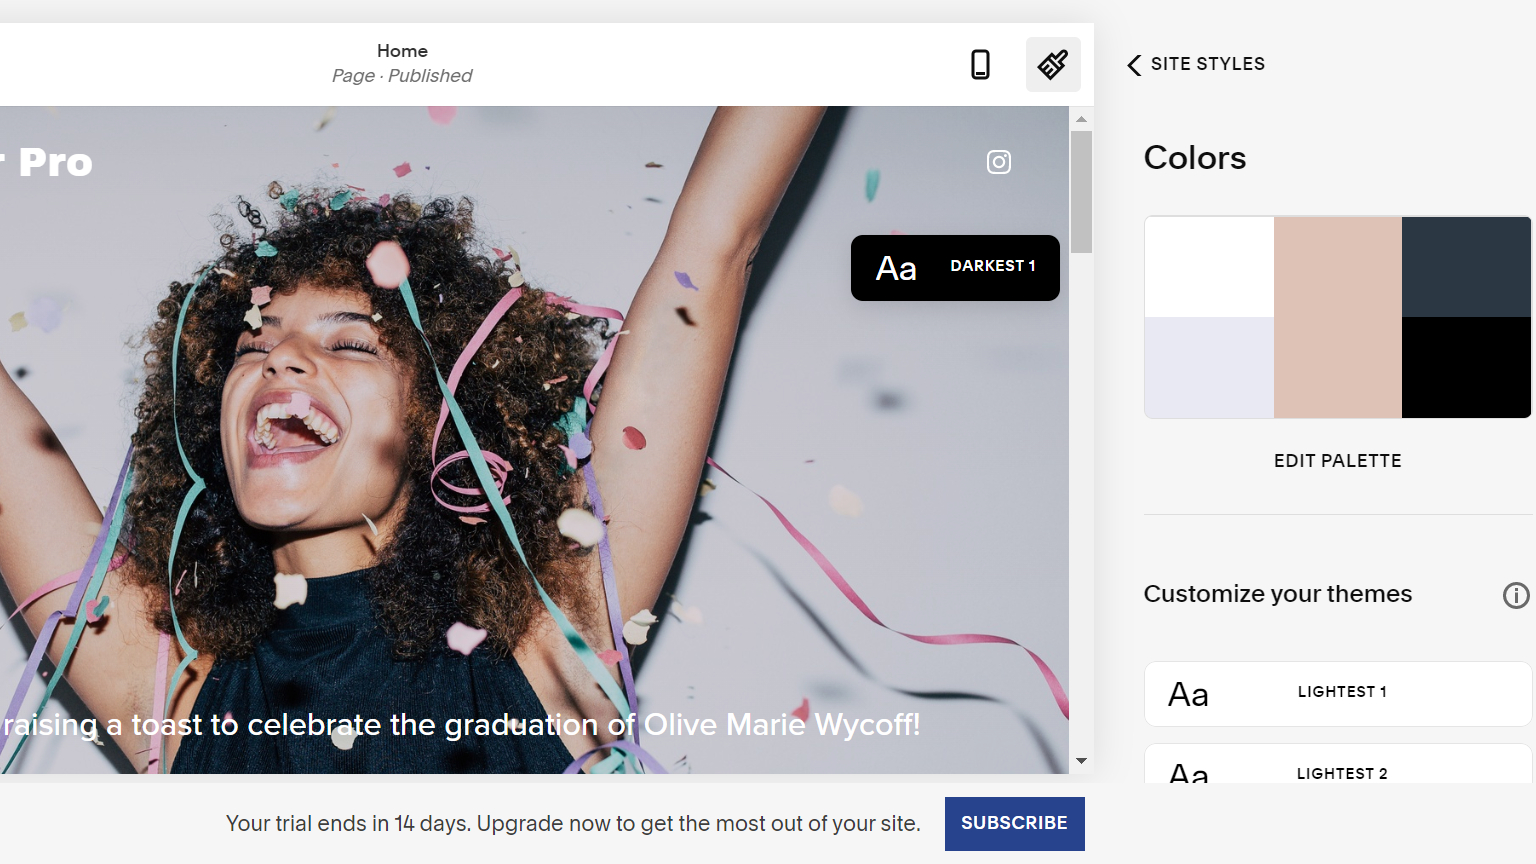 It's easy to locate Squarespace's color theme on your website builder dashboard